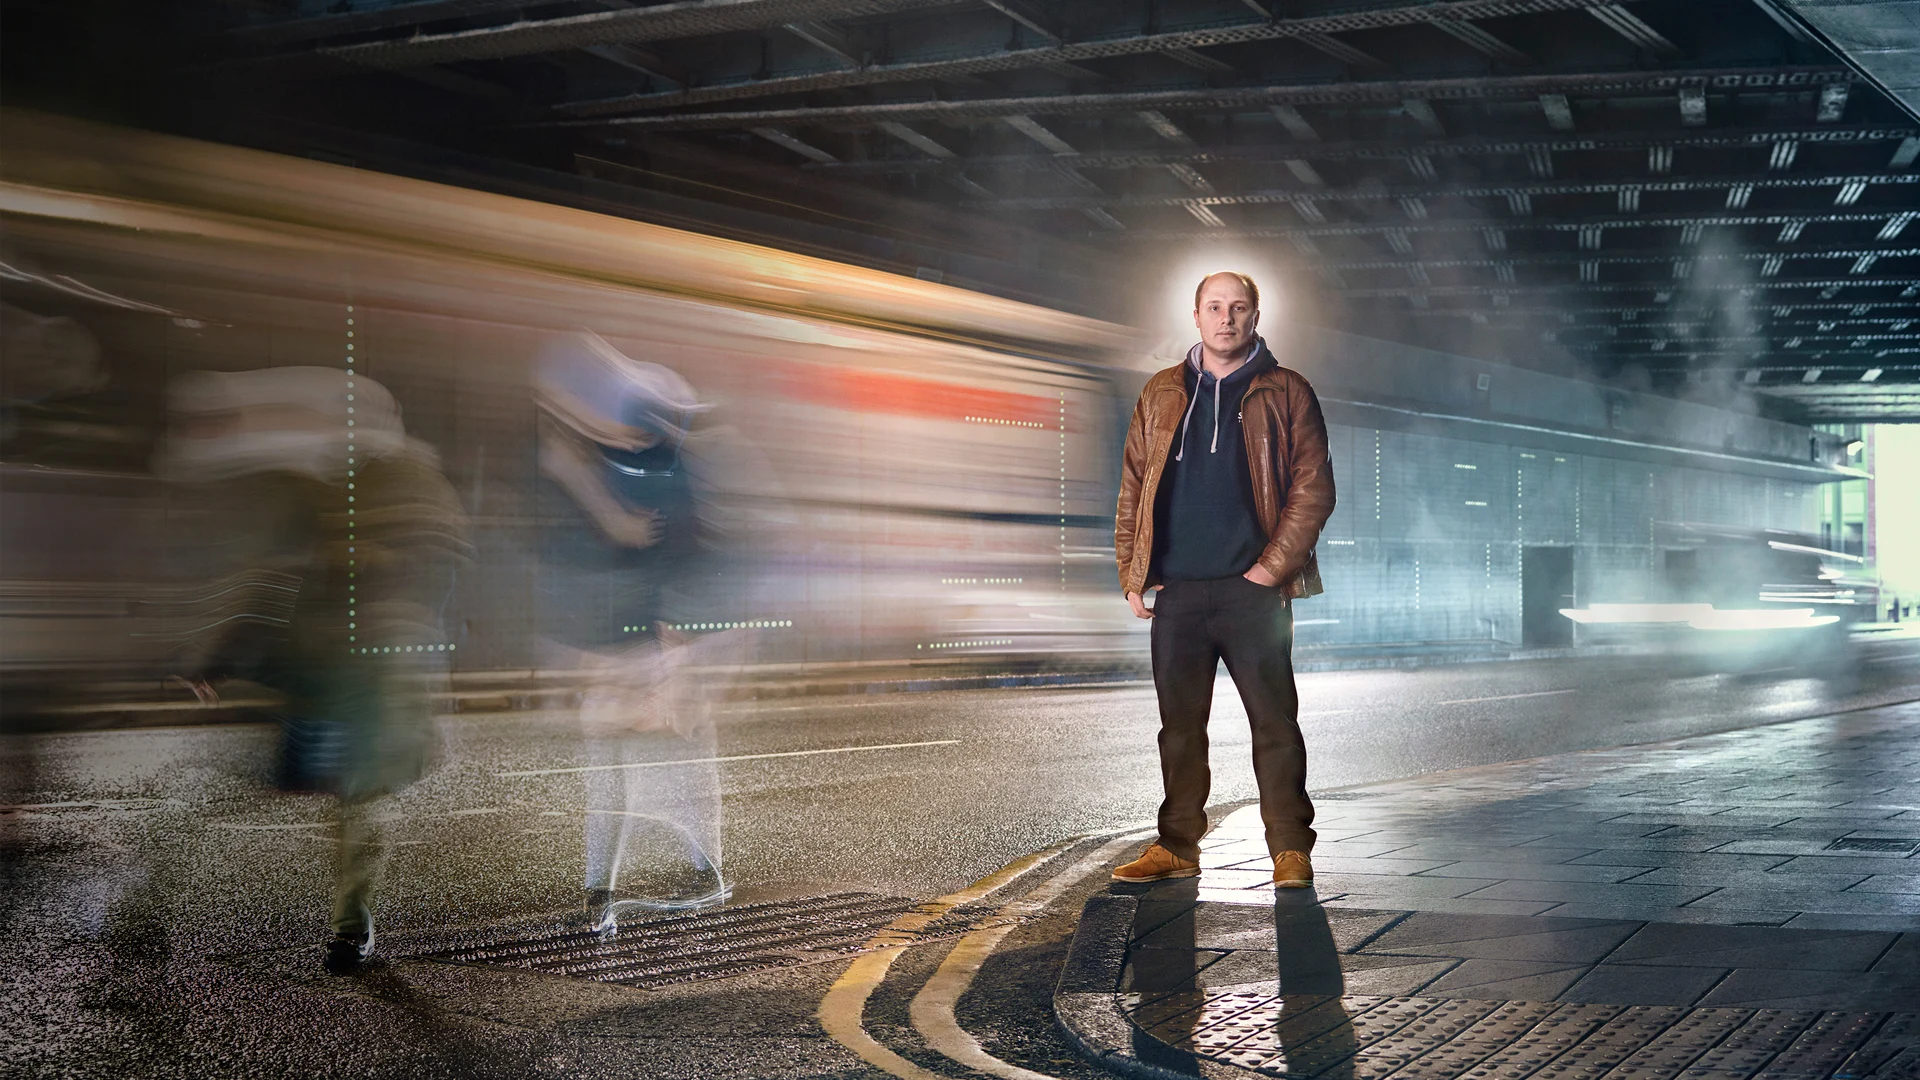 David McKee stood in tunnel under road bridge in Leeds. traffic and people around him are blurred.